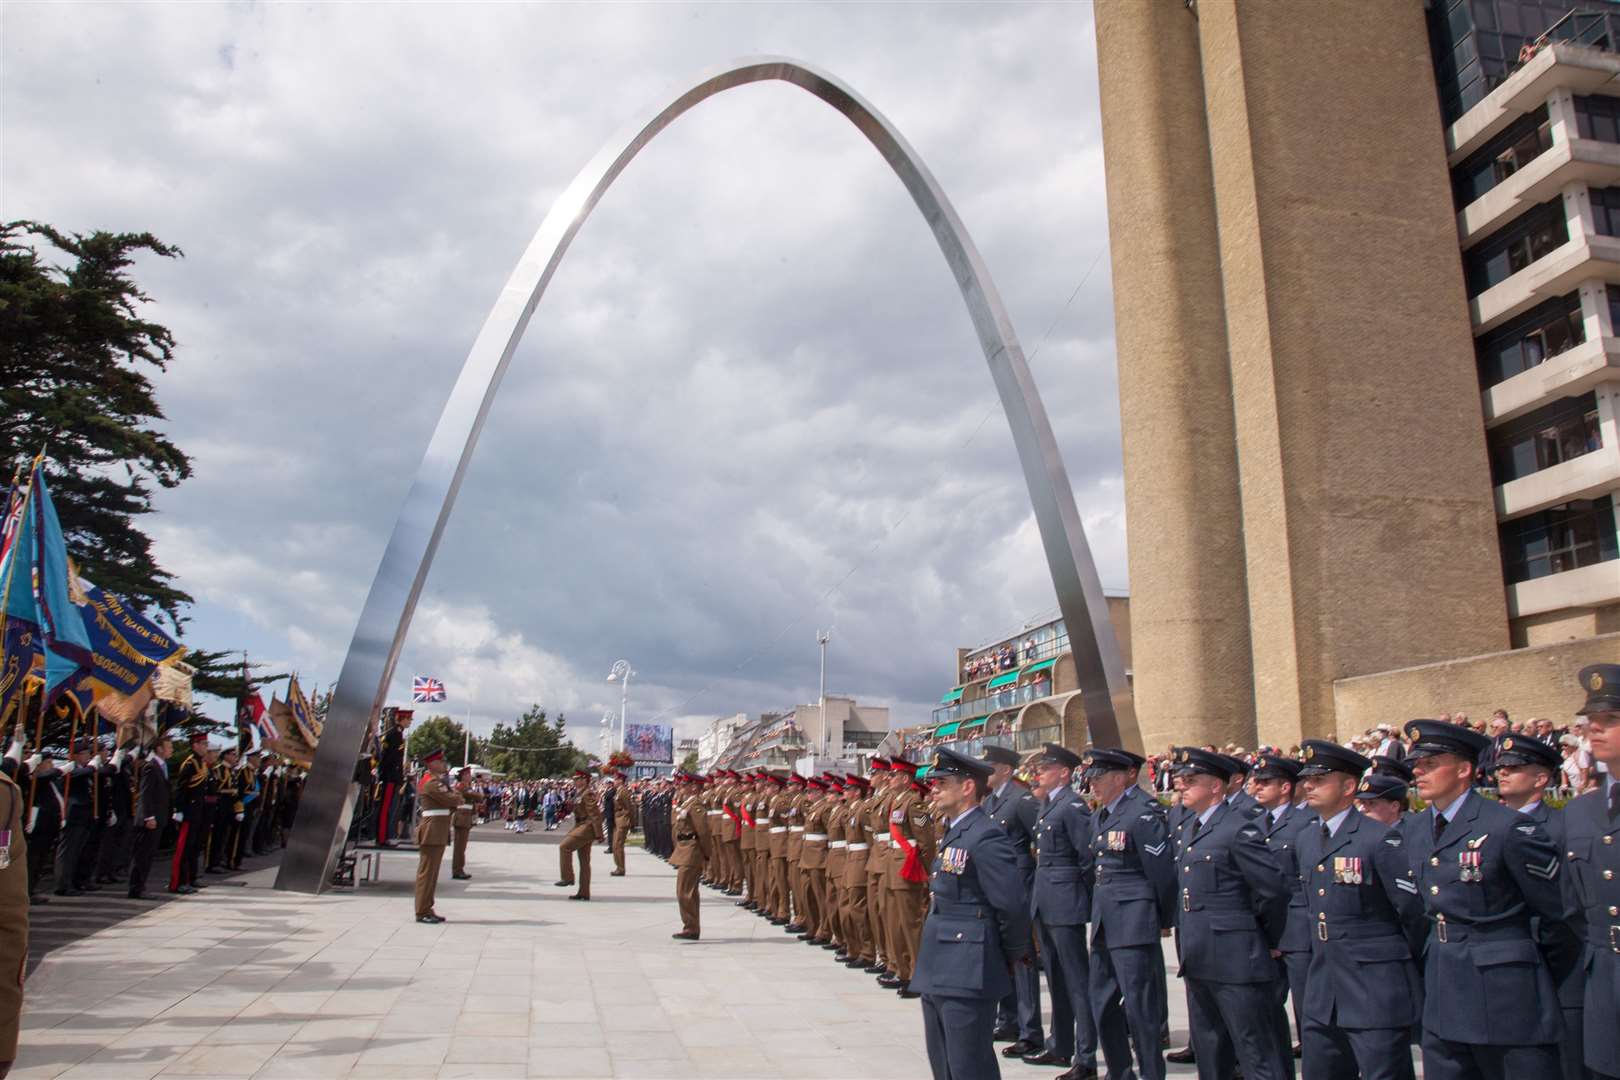 The memorial was unveiled in 2014, by Prince Harry. Photo credit: Manu Palomeque/LNP